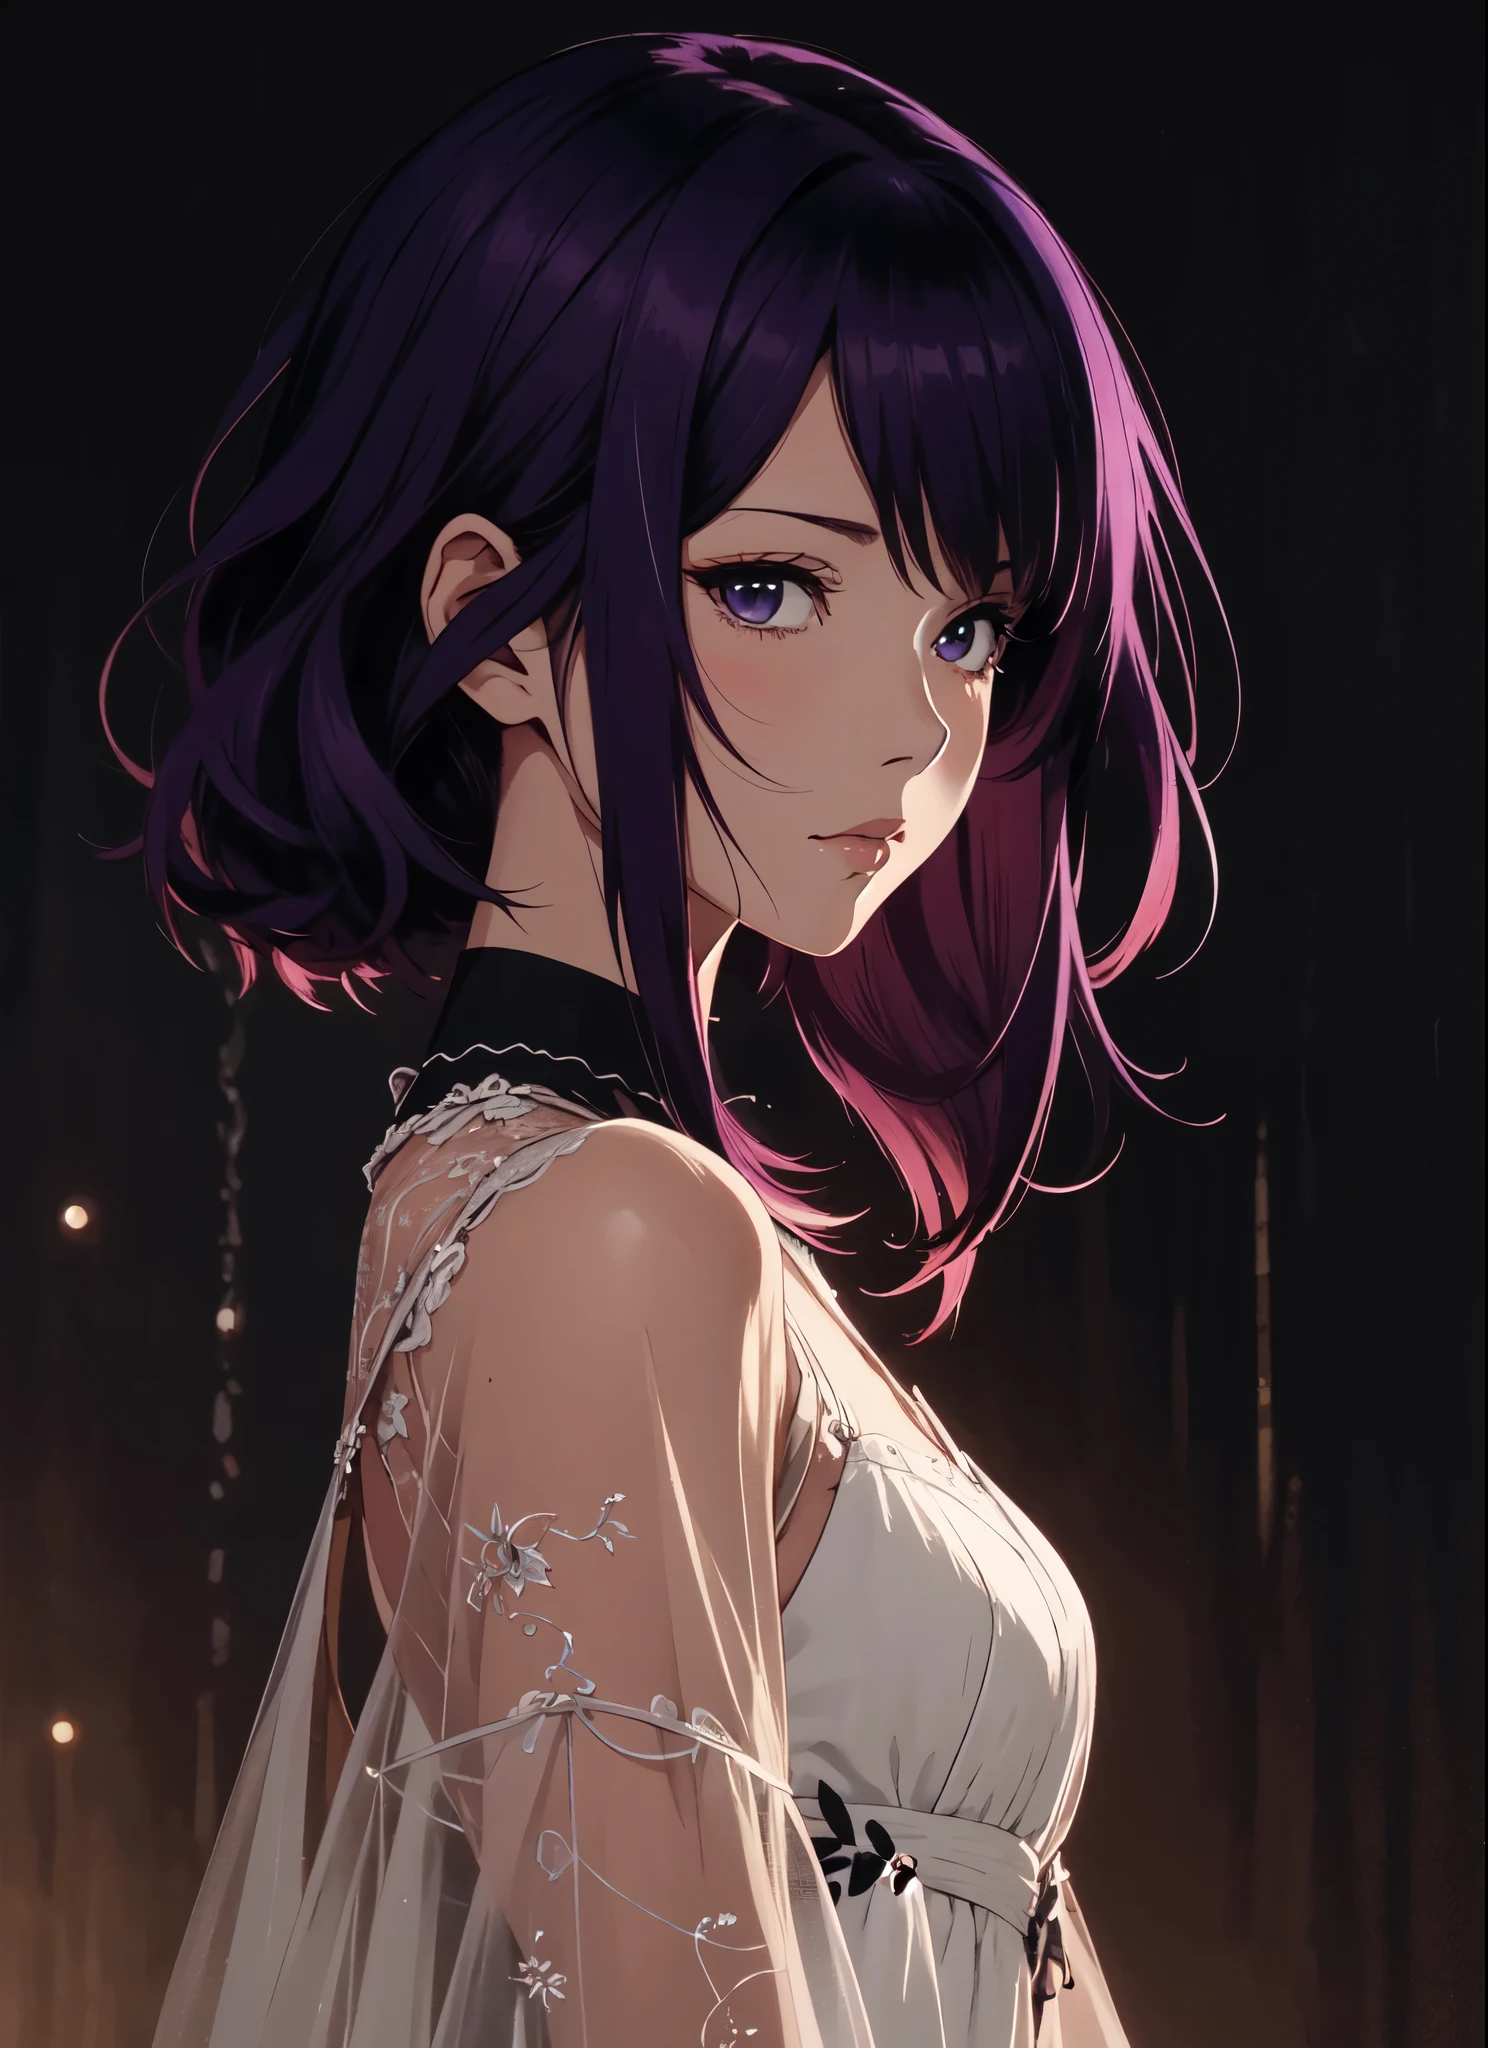 anime girl with purple hair and a white dress standing in front of a dark background, guweiz, artwork in the style of guweiz, profile of anime girl, portrait anime girl, beautiful anime portrait, portrait of an anime girl, portrait of anime girl, anime girl portrait profile, digital anime art, detailed portrait of anime girl, guweiz masterpiece